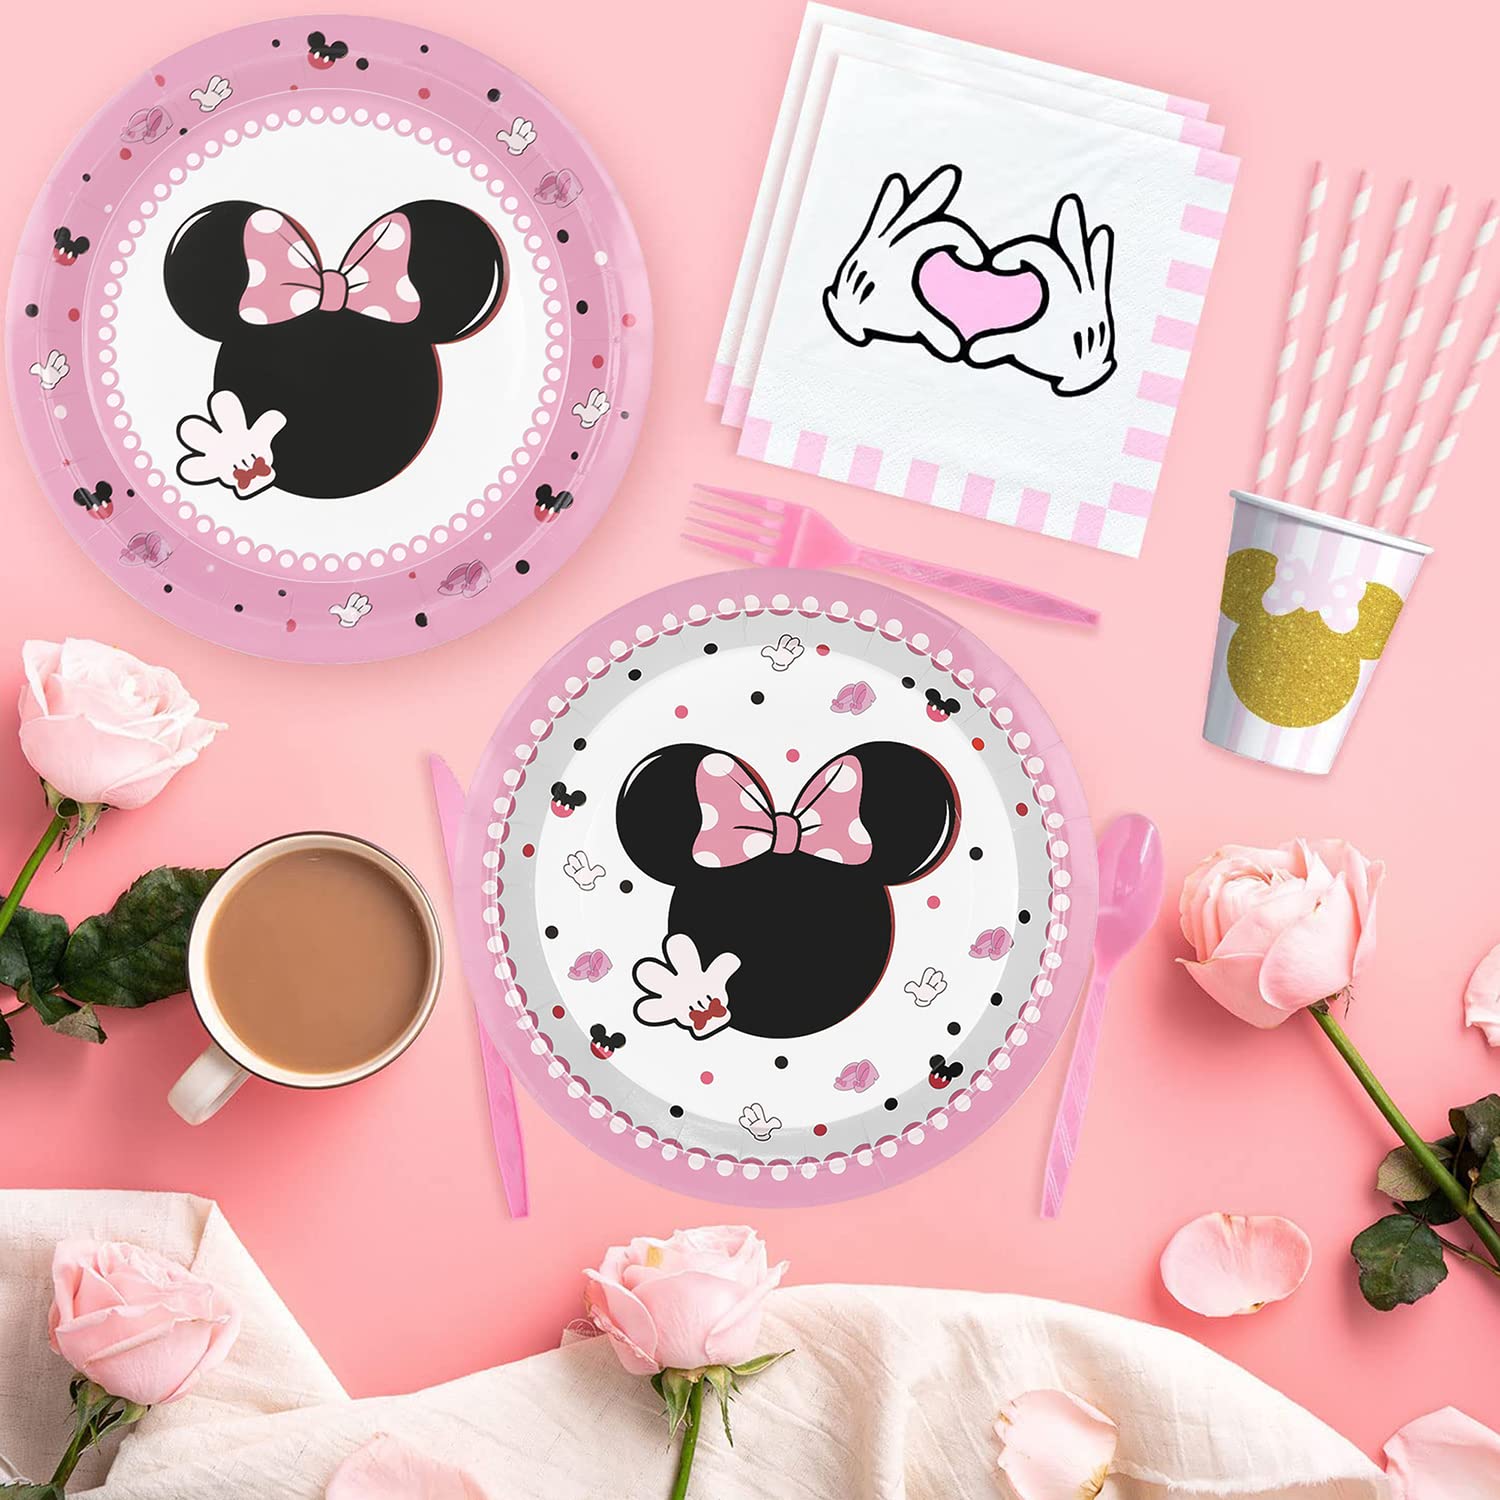 Mouse Birthday Party Supplies,50 Pack Mouse Party Favors,Pink Tableware Paper Plates for Minnie Mouse Themed Baby Shower Birthday Party Decorations